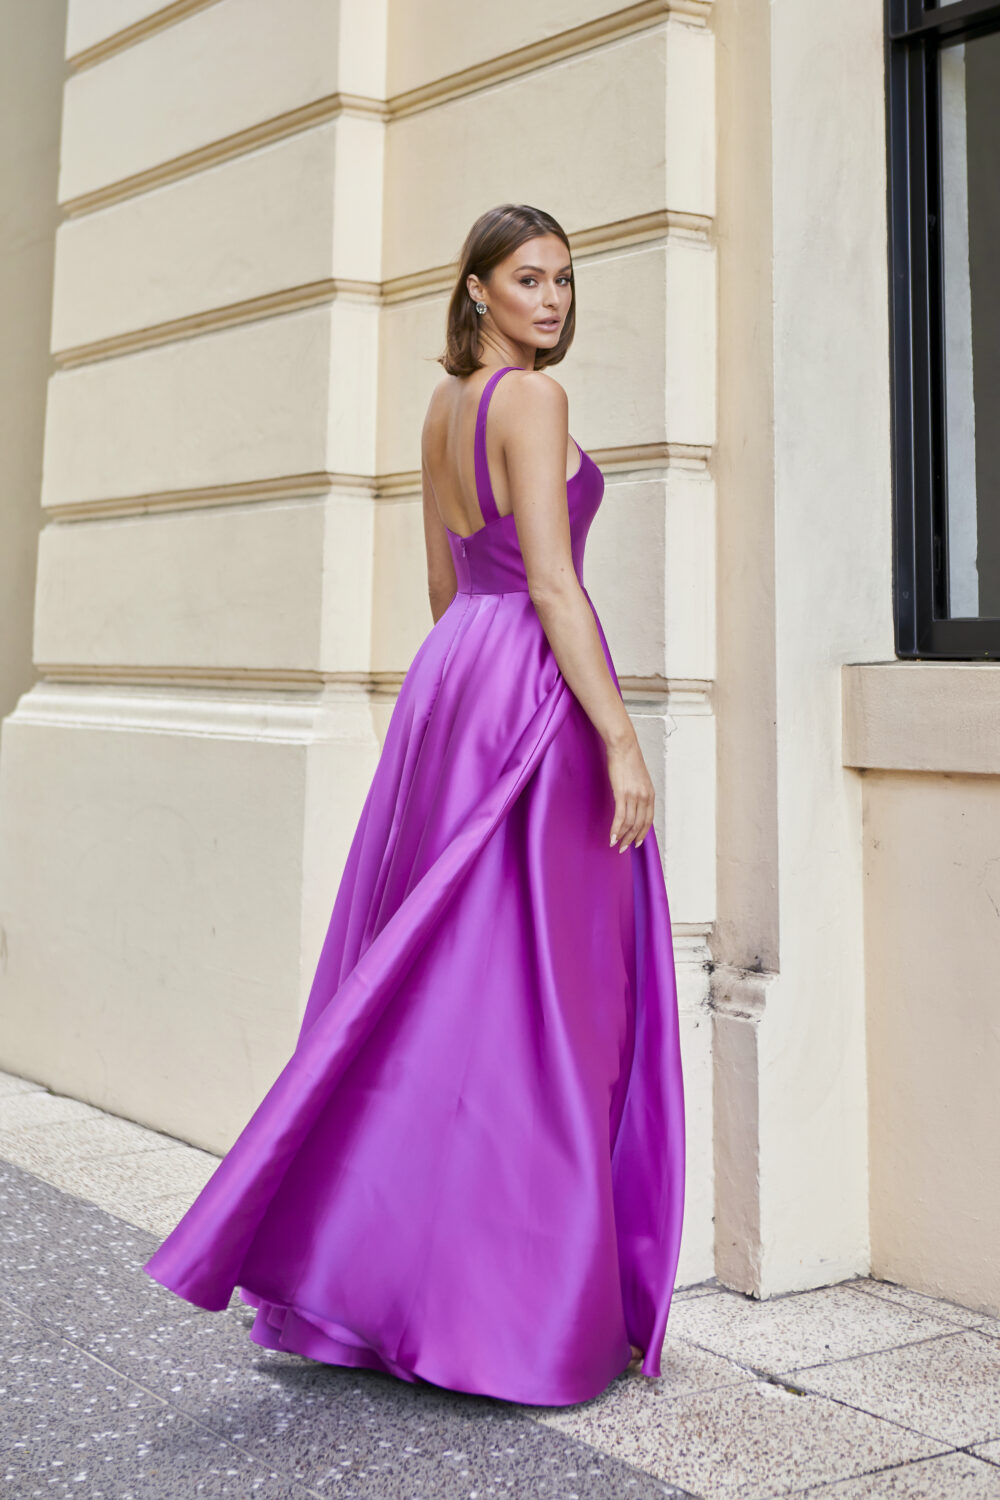 SHELLY PO941 Evening & Formal dress by Tania Olsen Designs